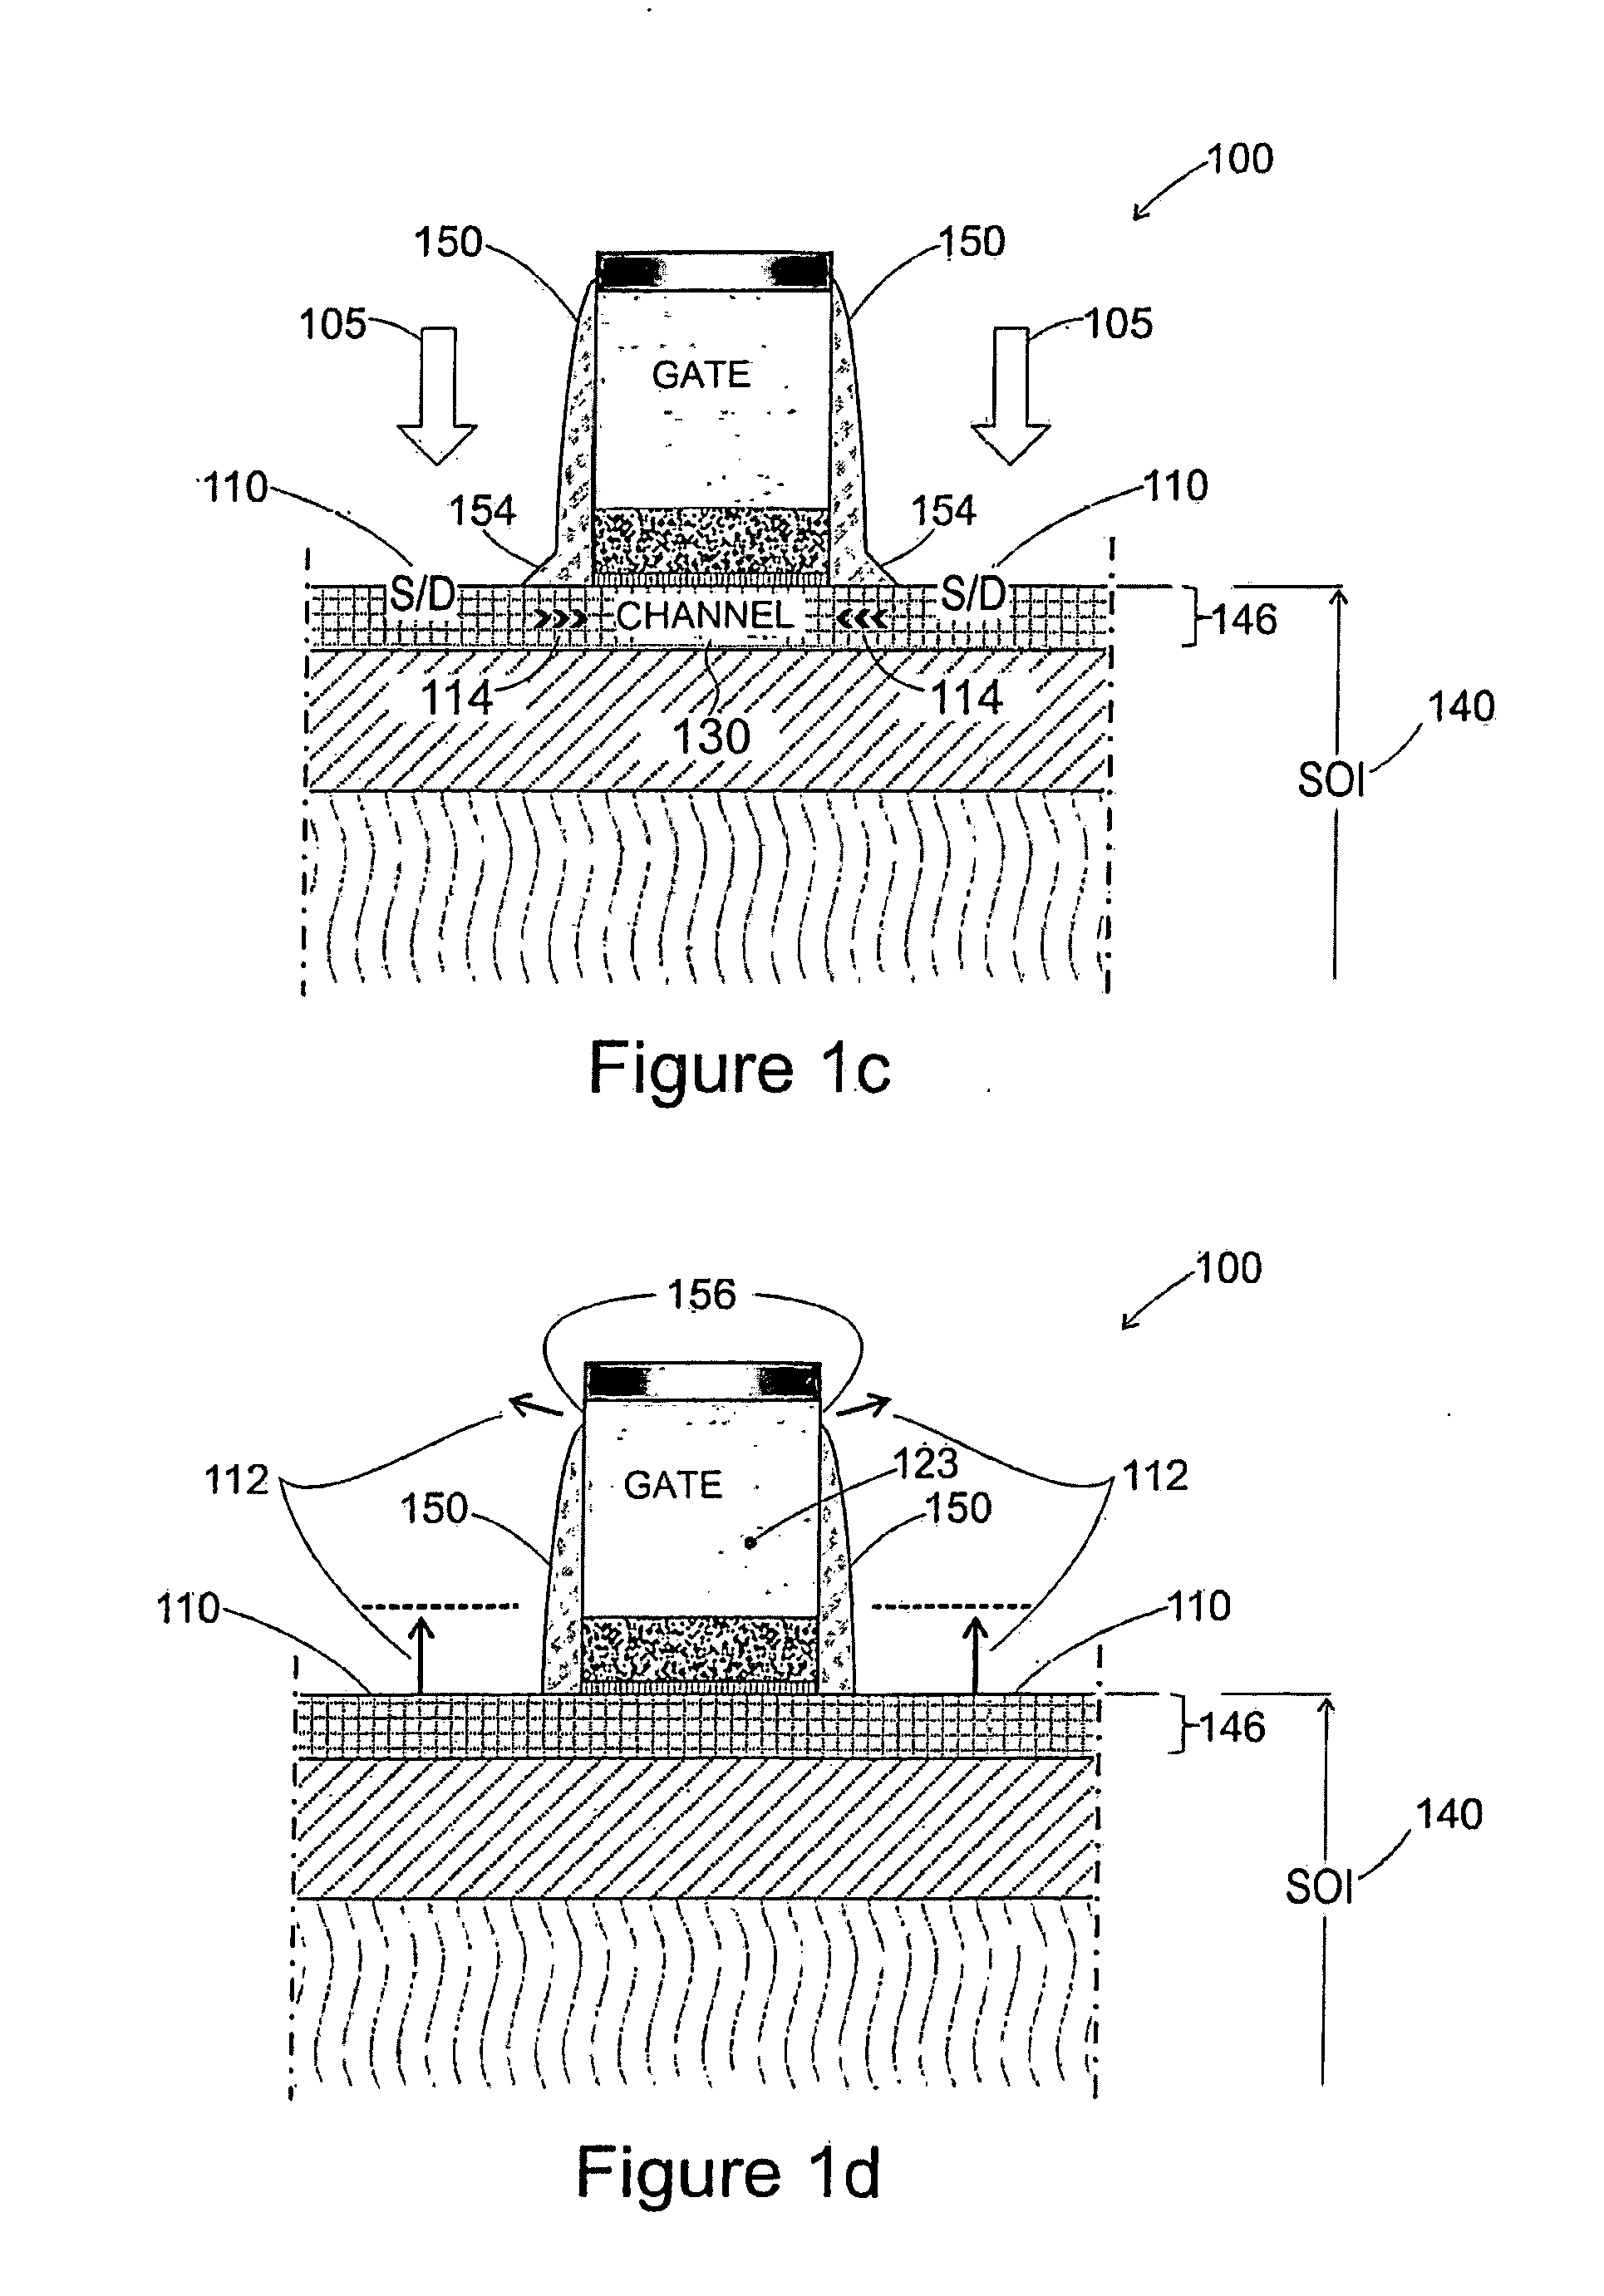 Method for forming spacers for a transistor gate